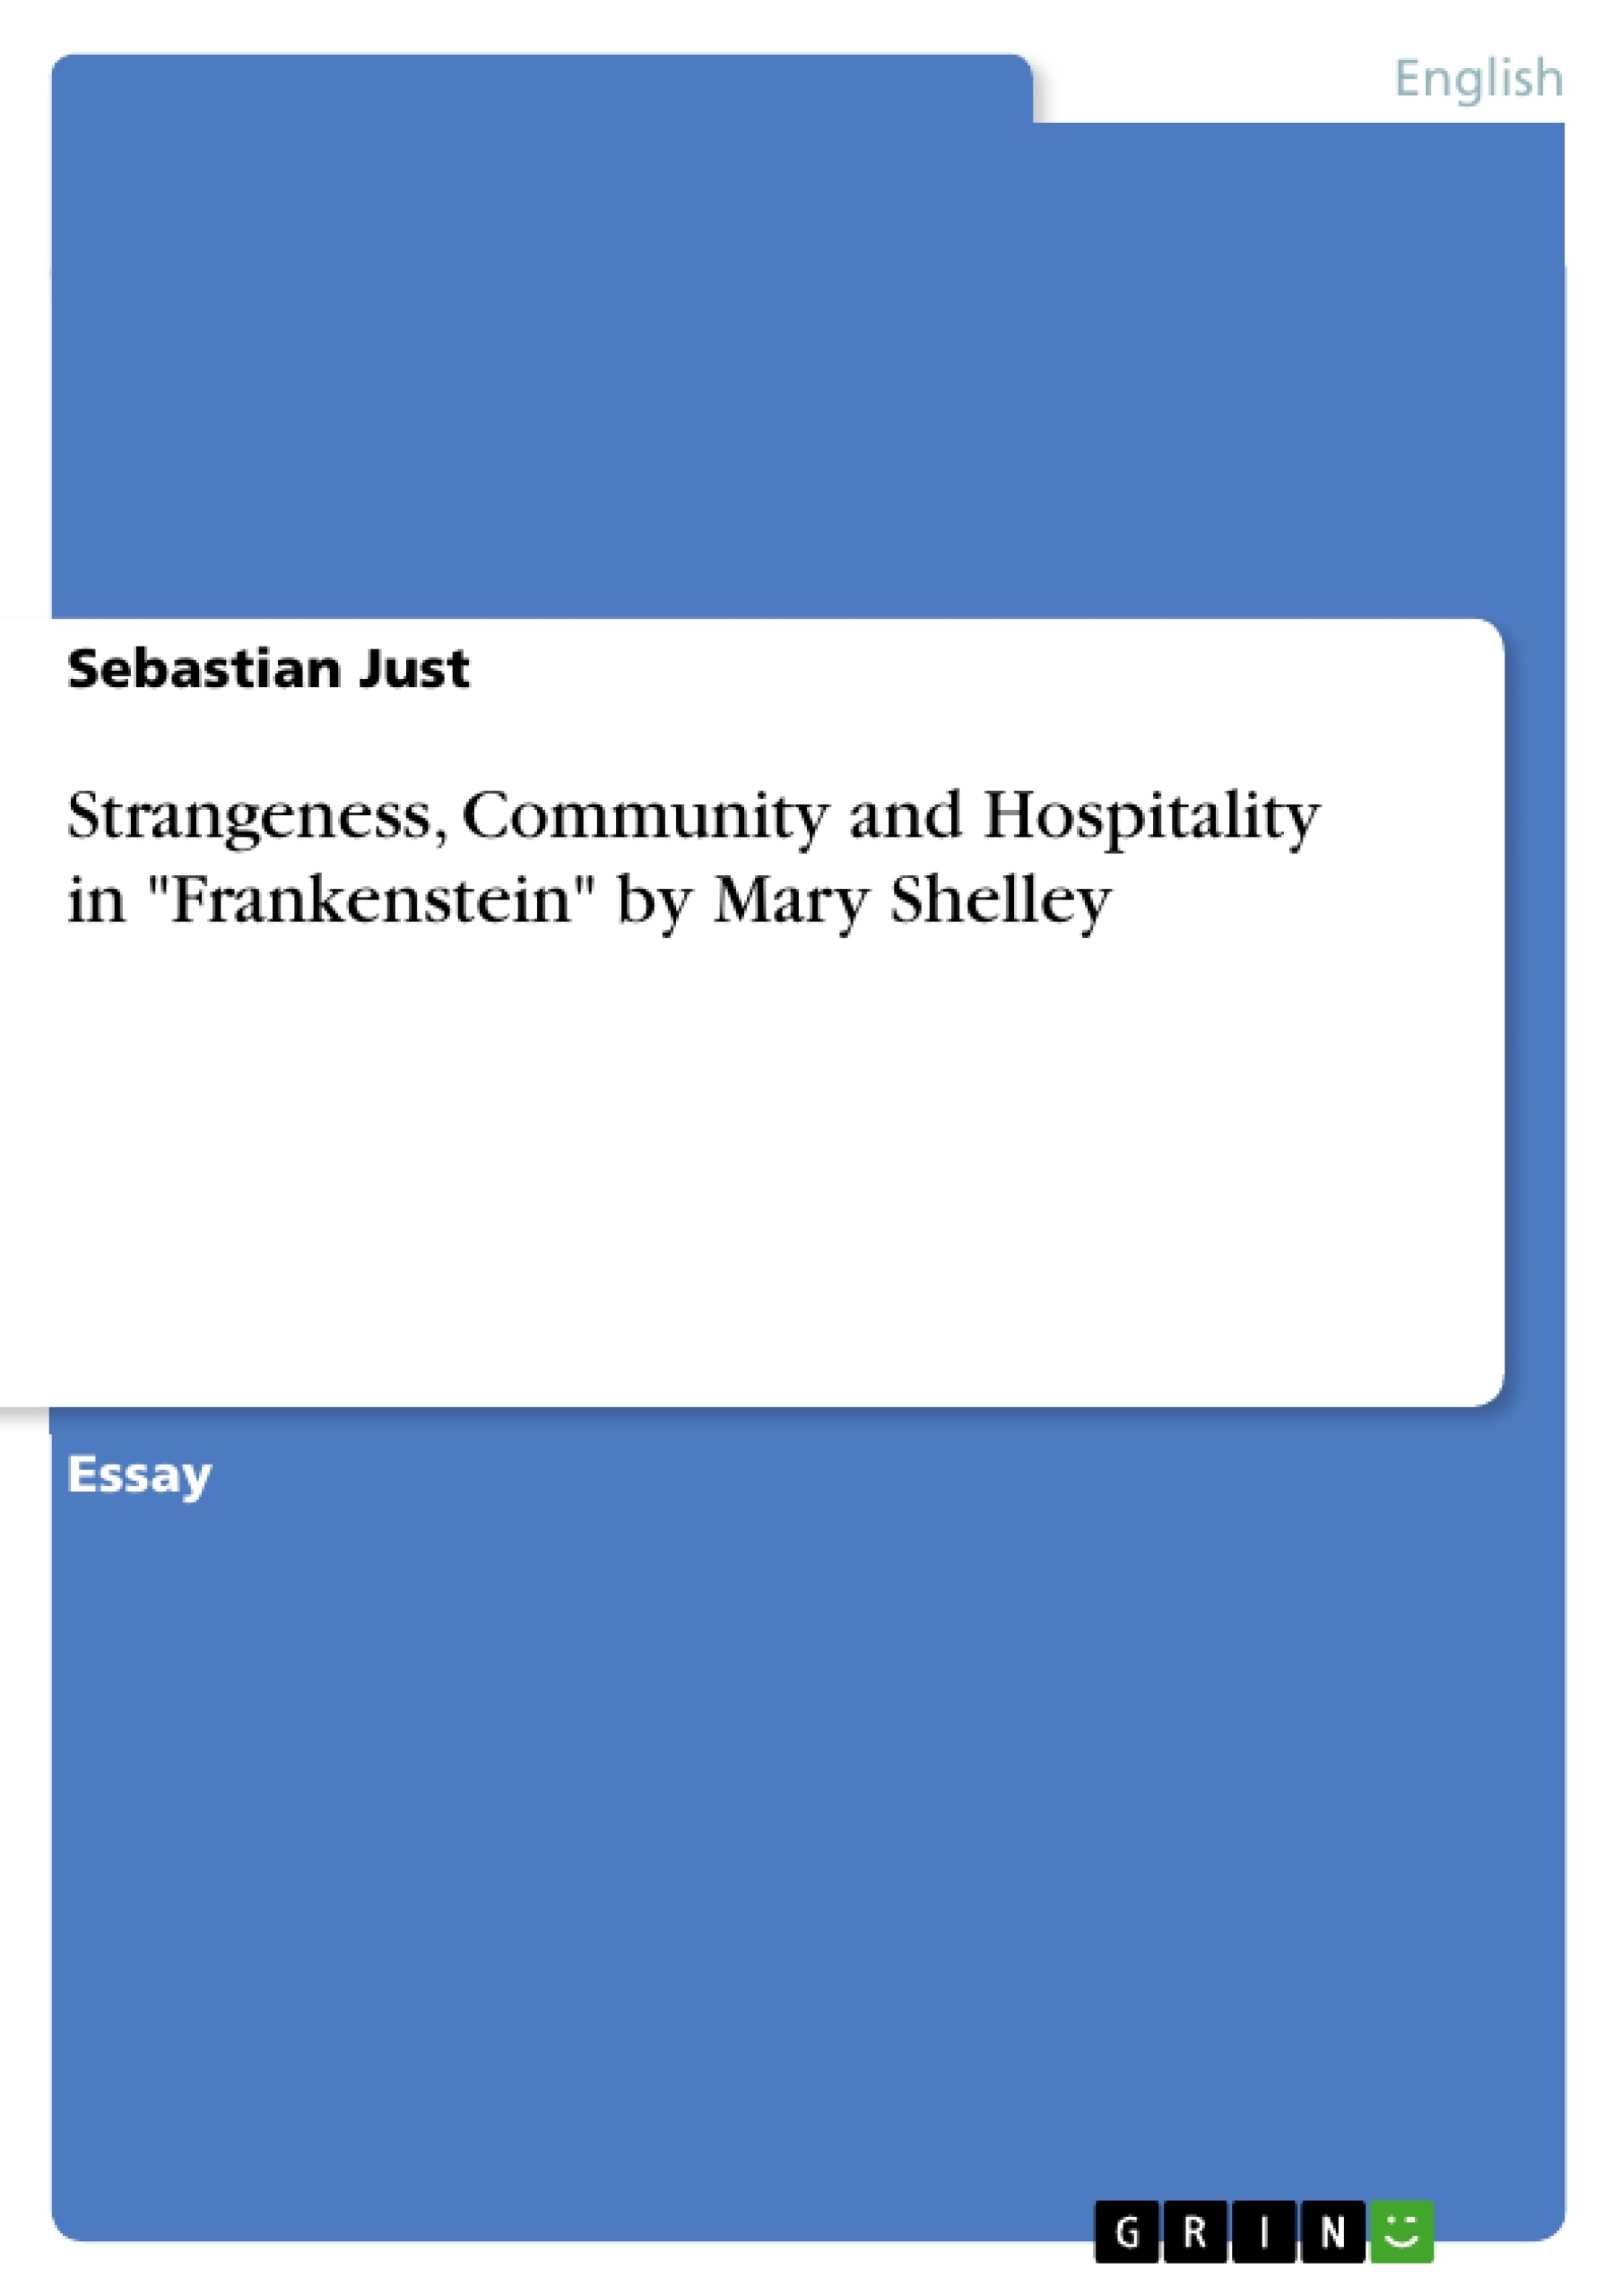 Title: Strangeness, Community and Hospitality in "Frankenstein" by Mary Shelley